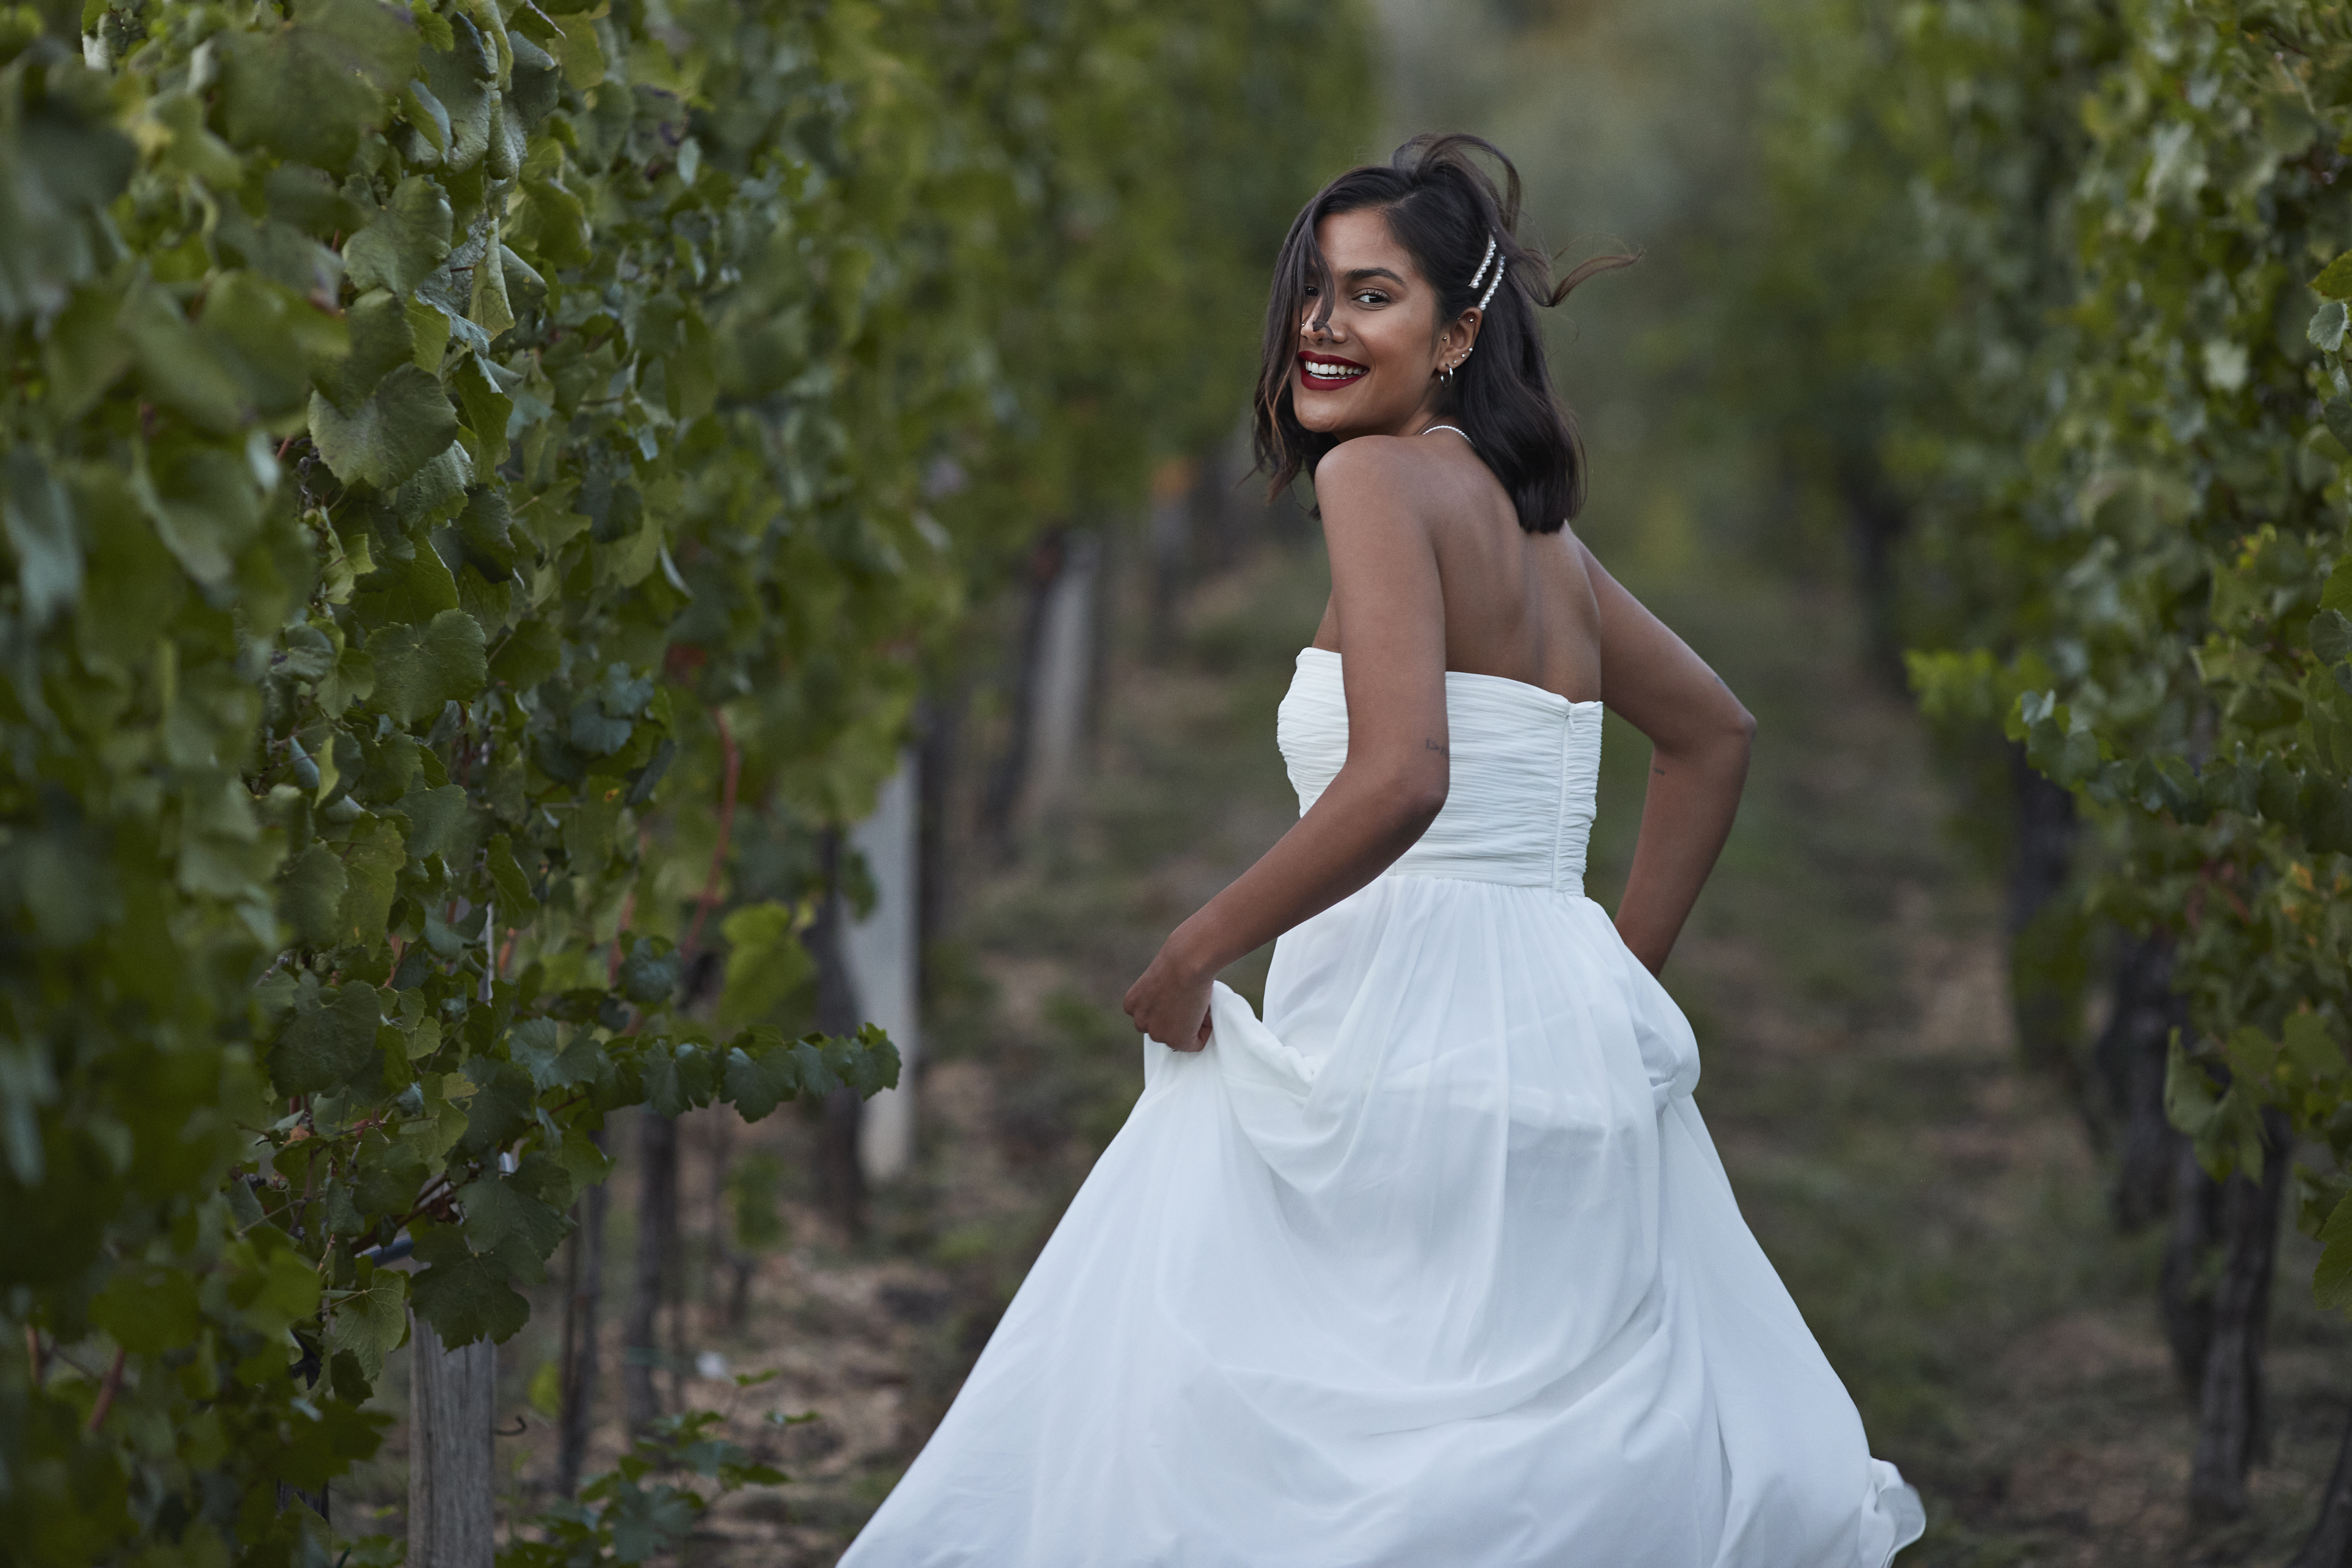 A woman in a field, smiling in her wedding dress | Source: Getty Images